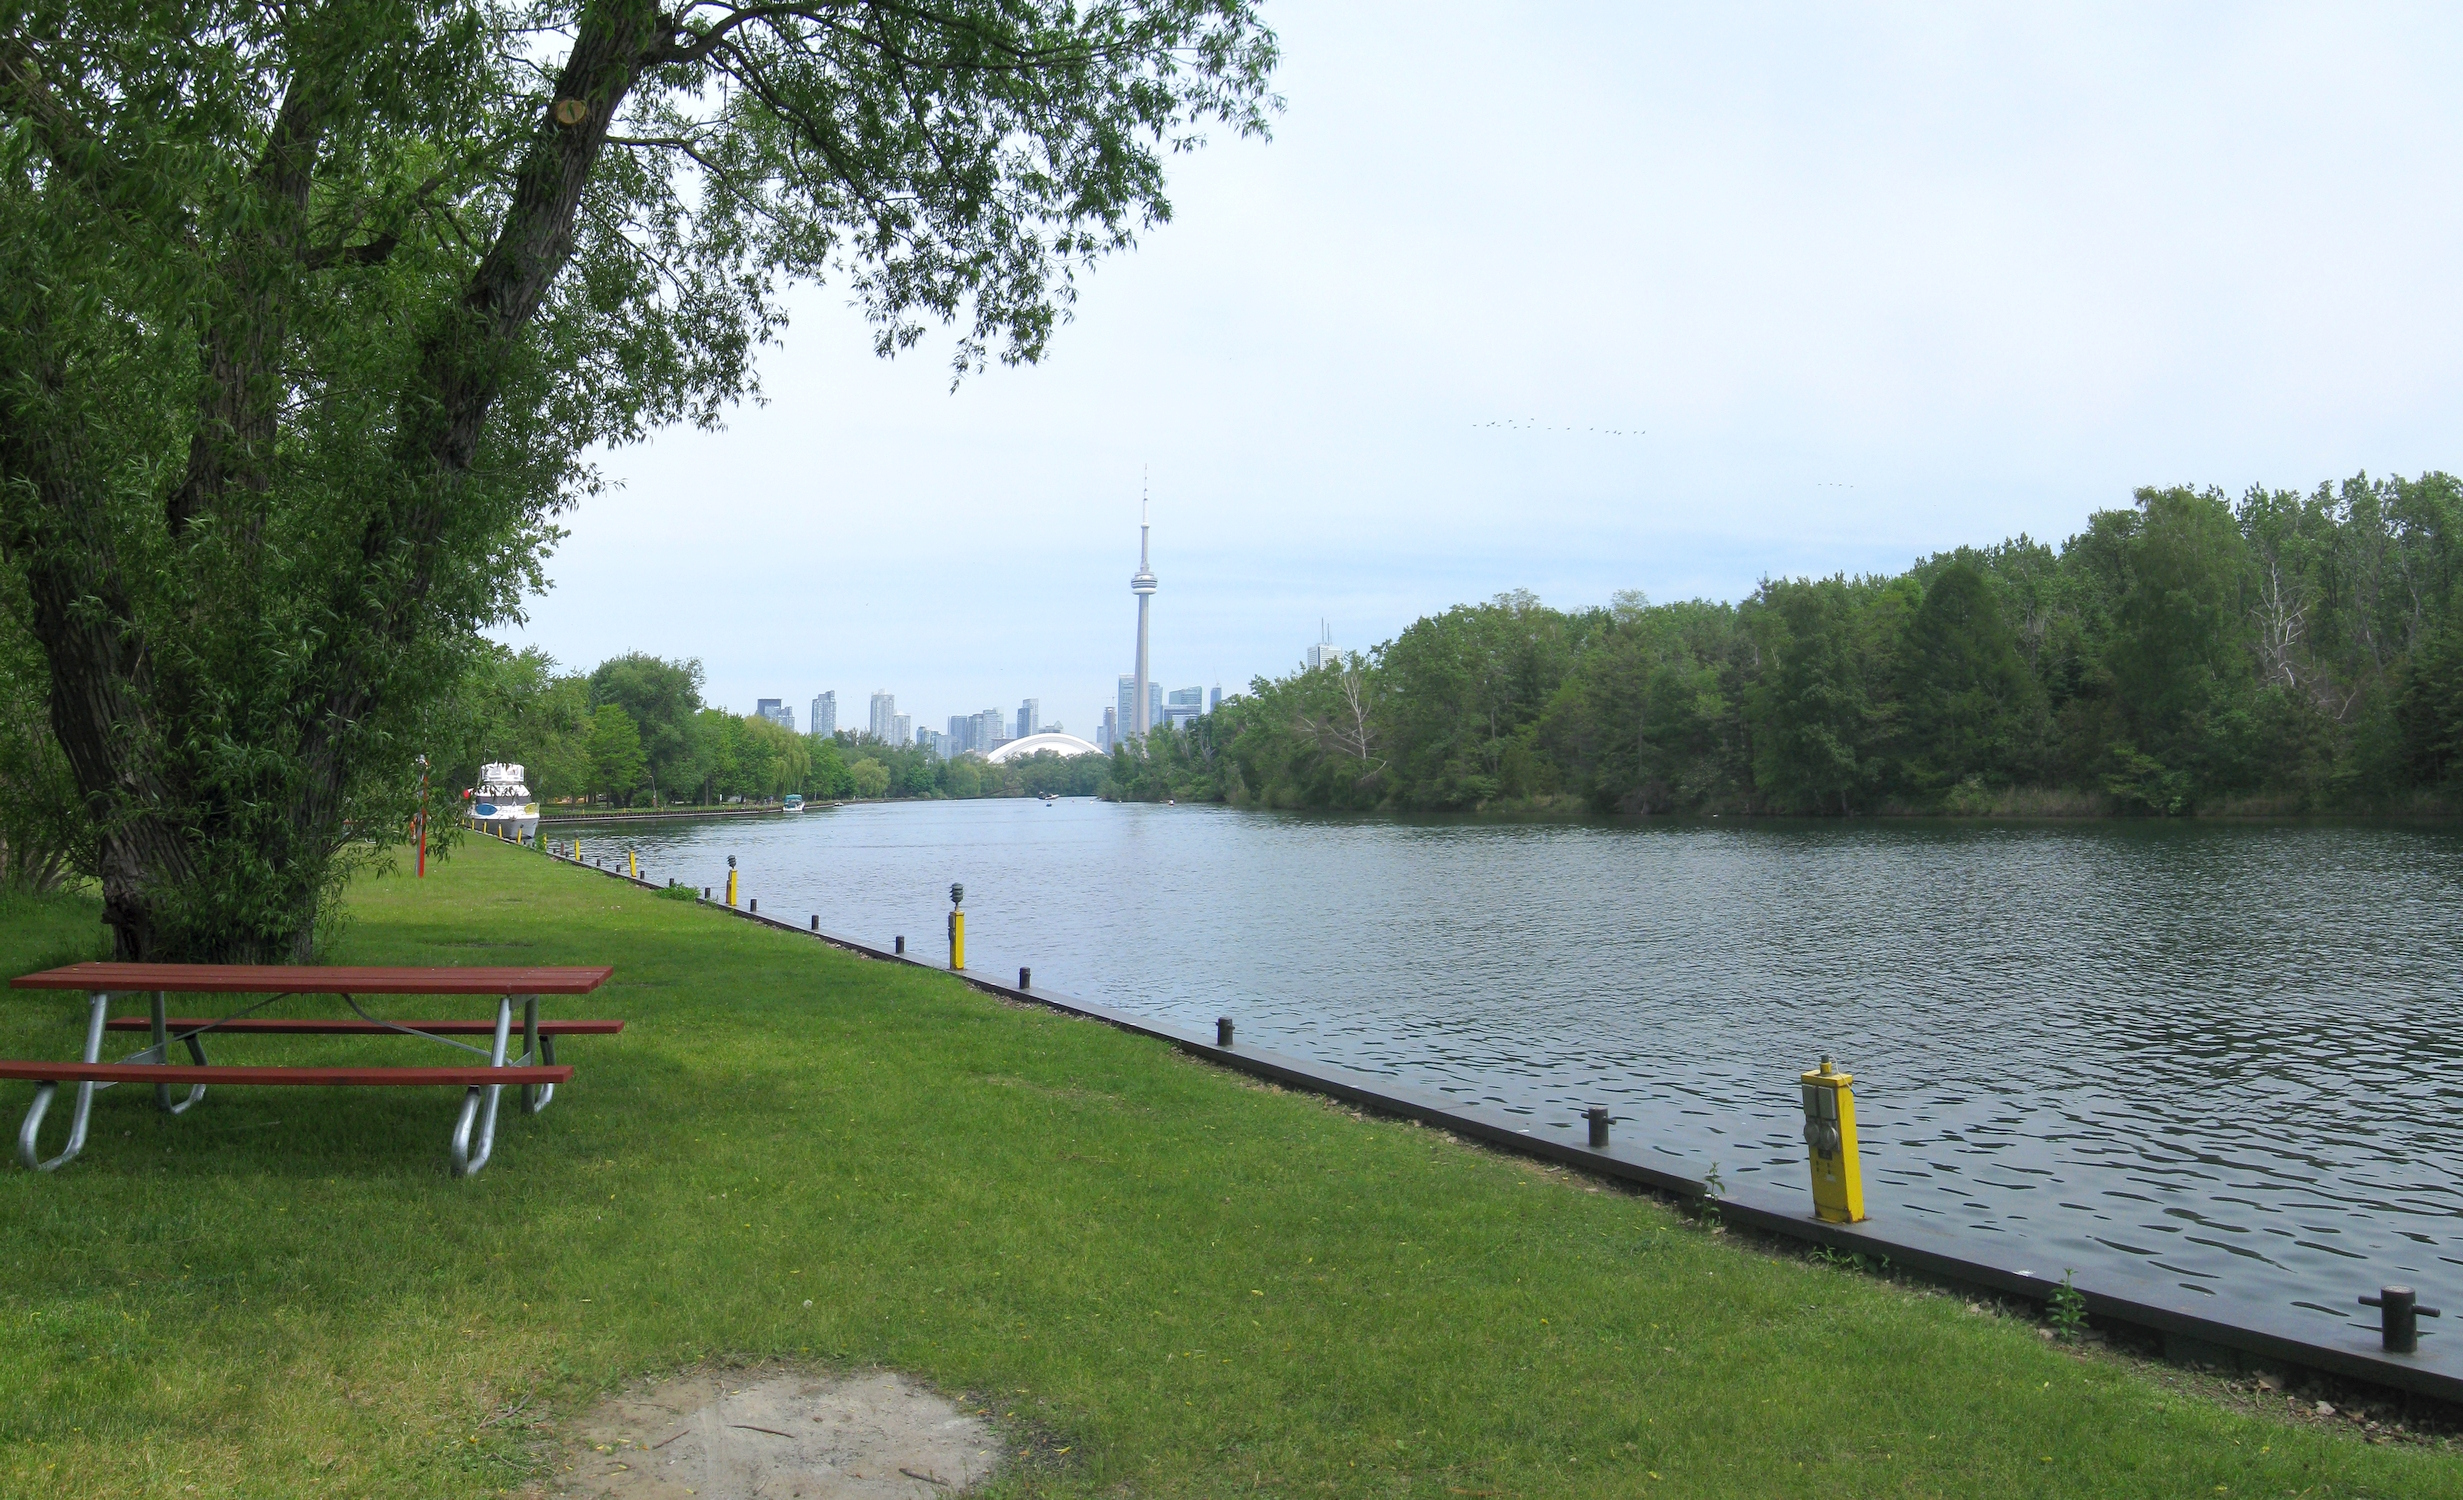 Green space in Toronto by the river